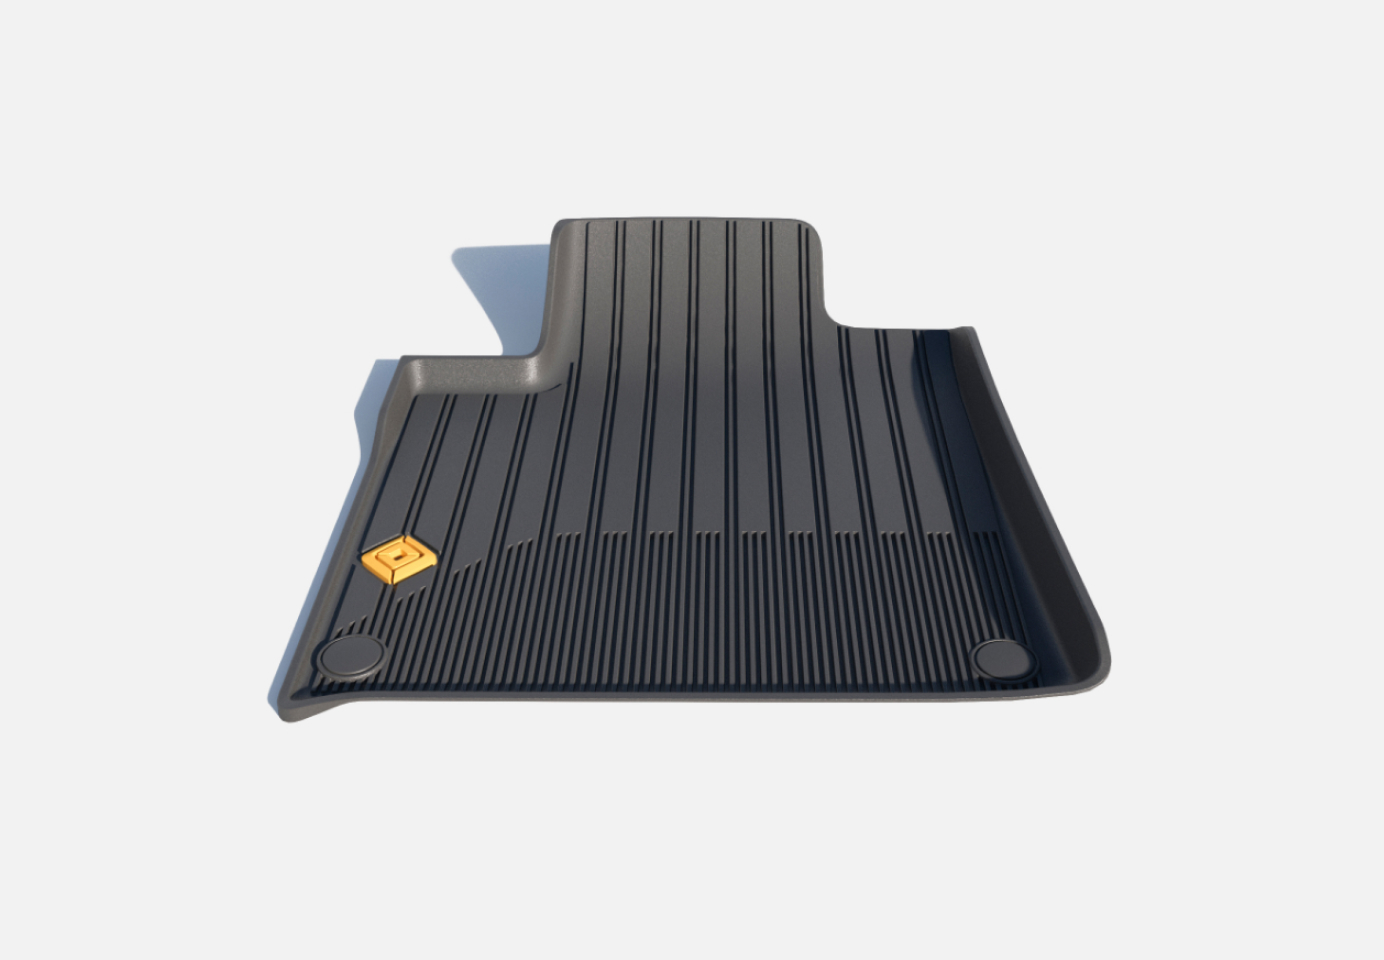 Chilewich floor mats seem reasonable for dry weather. All-weather mats are  recommended if you live in the PNW. : r/Rivian